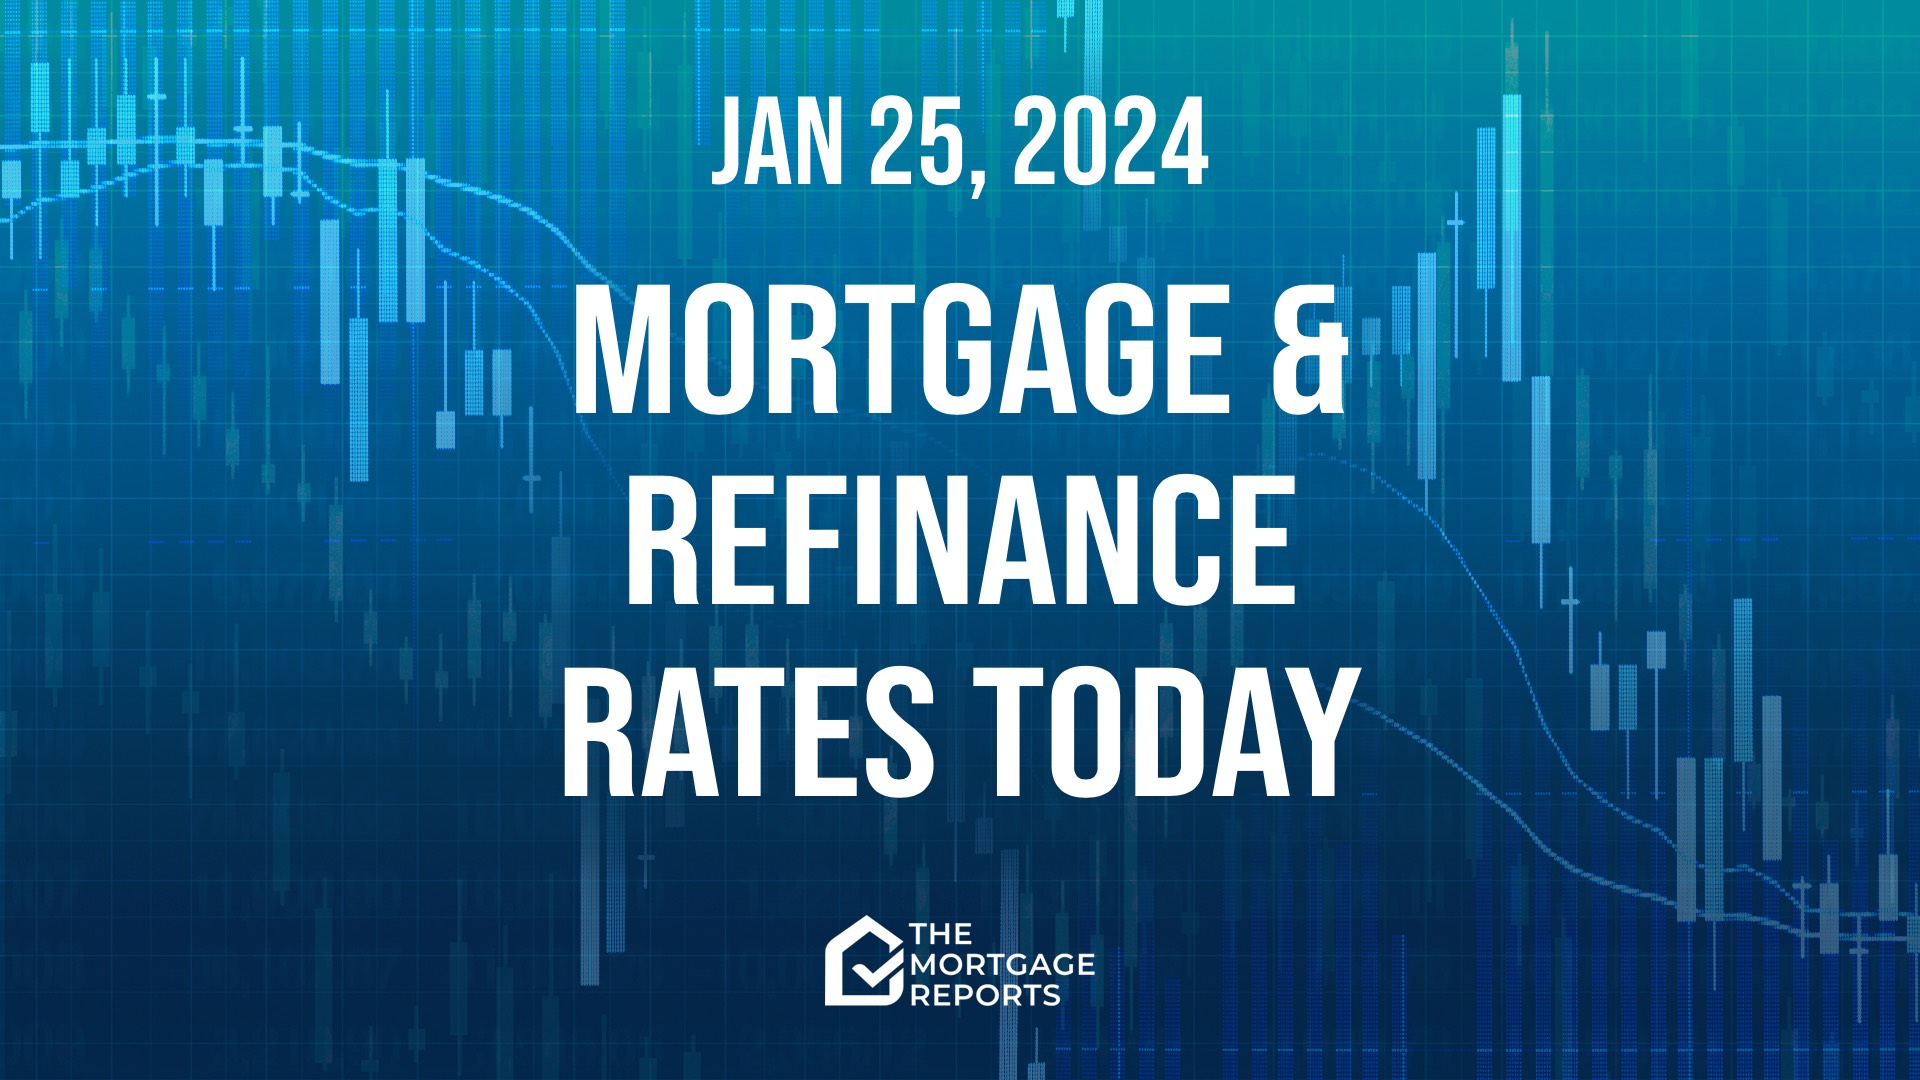 Mortgage rates today, Jan 25, 2024